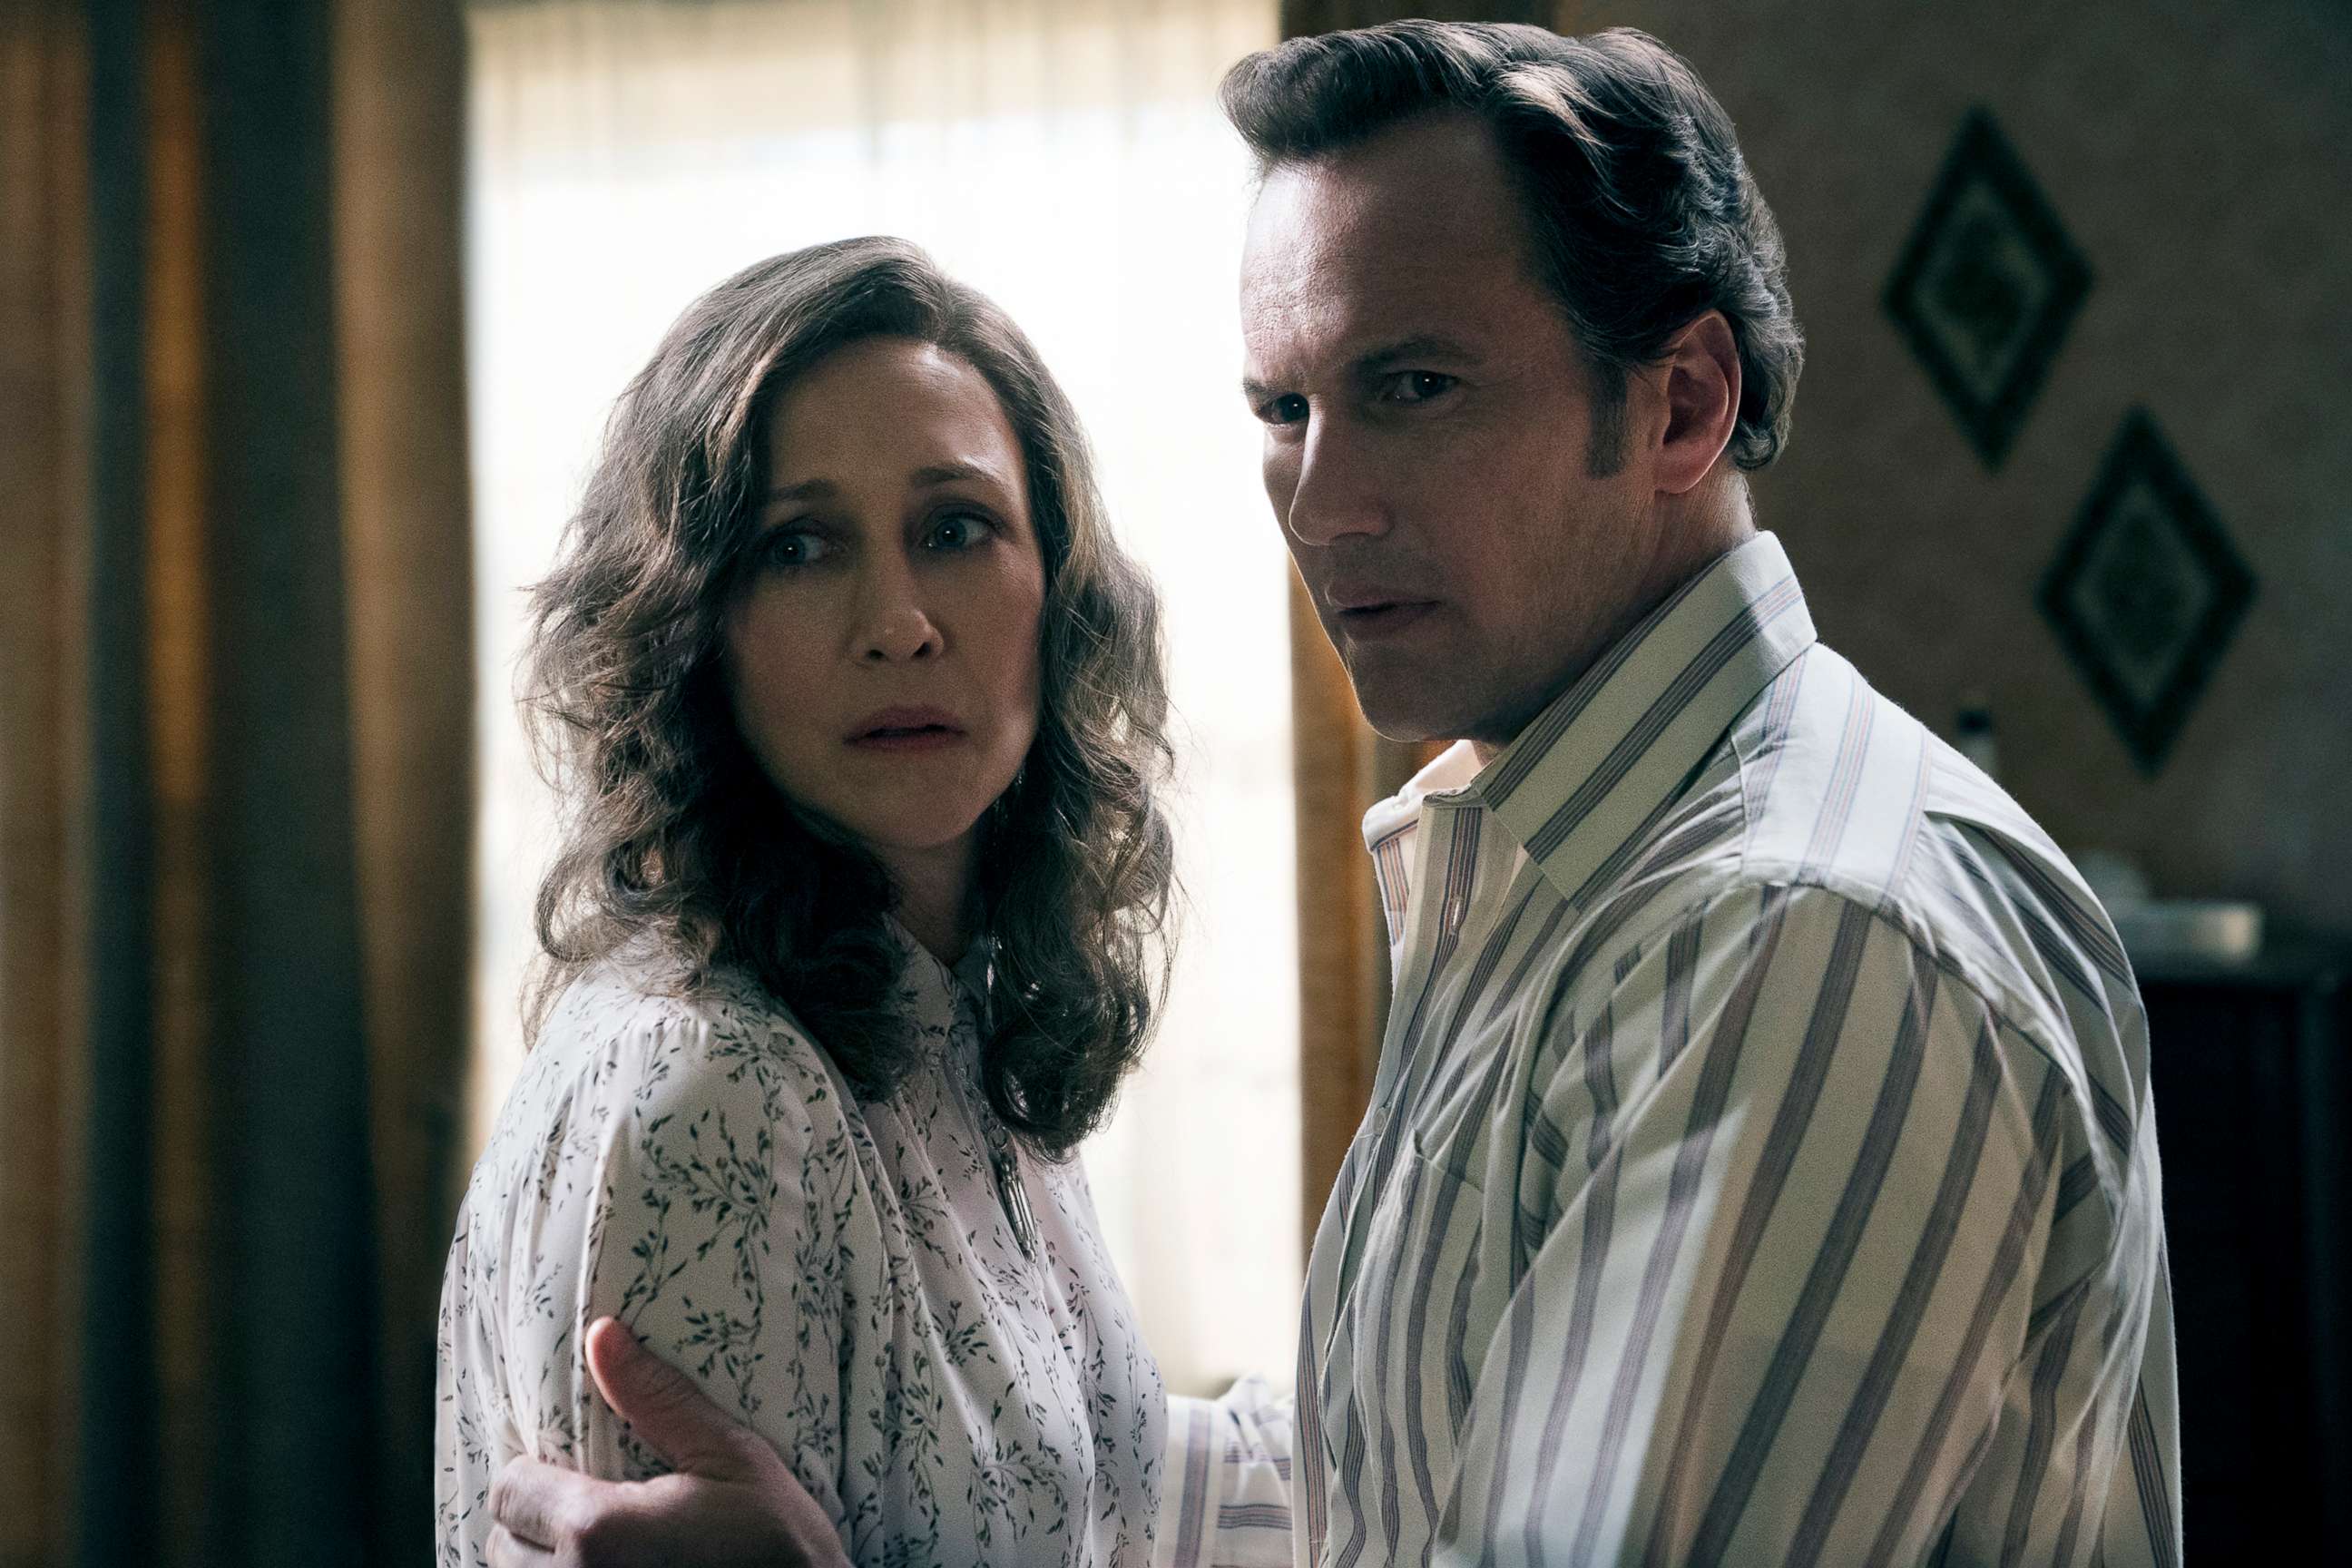 PHOTO: Vera Farmiga as Lorraine Warren and Patrick Wilson as Ed Warren in a scene from "The Conjuring: The Devil Made Me Do It."